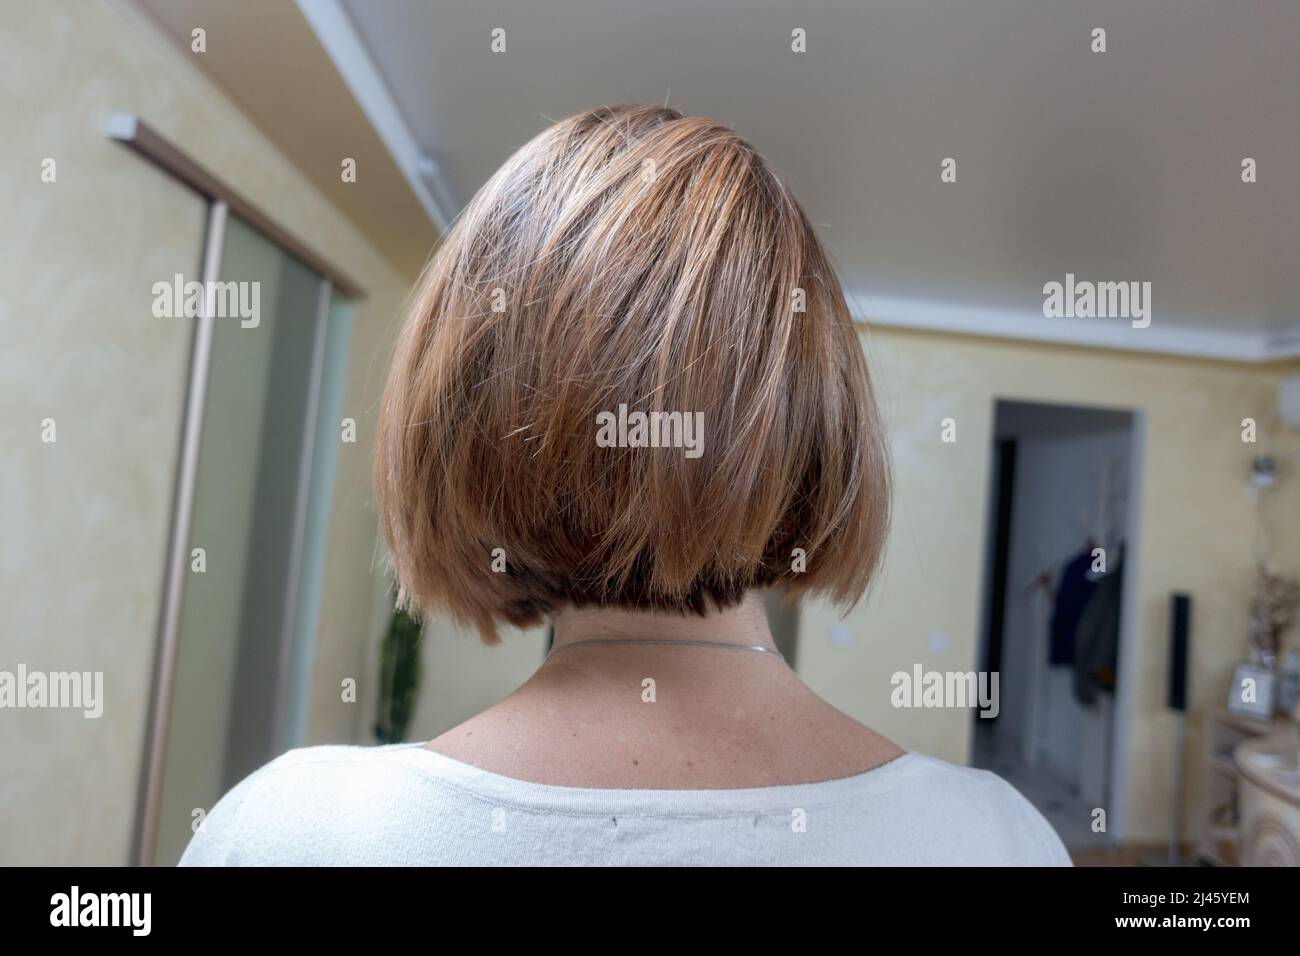 Women's short hairstyle back view Stock Photo - Alamy